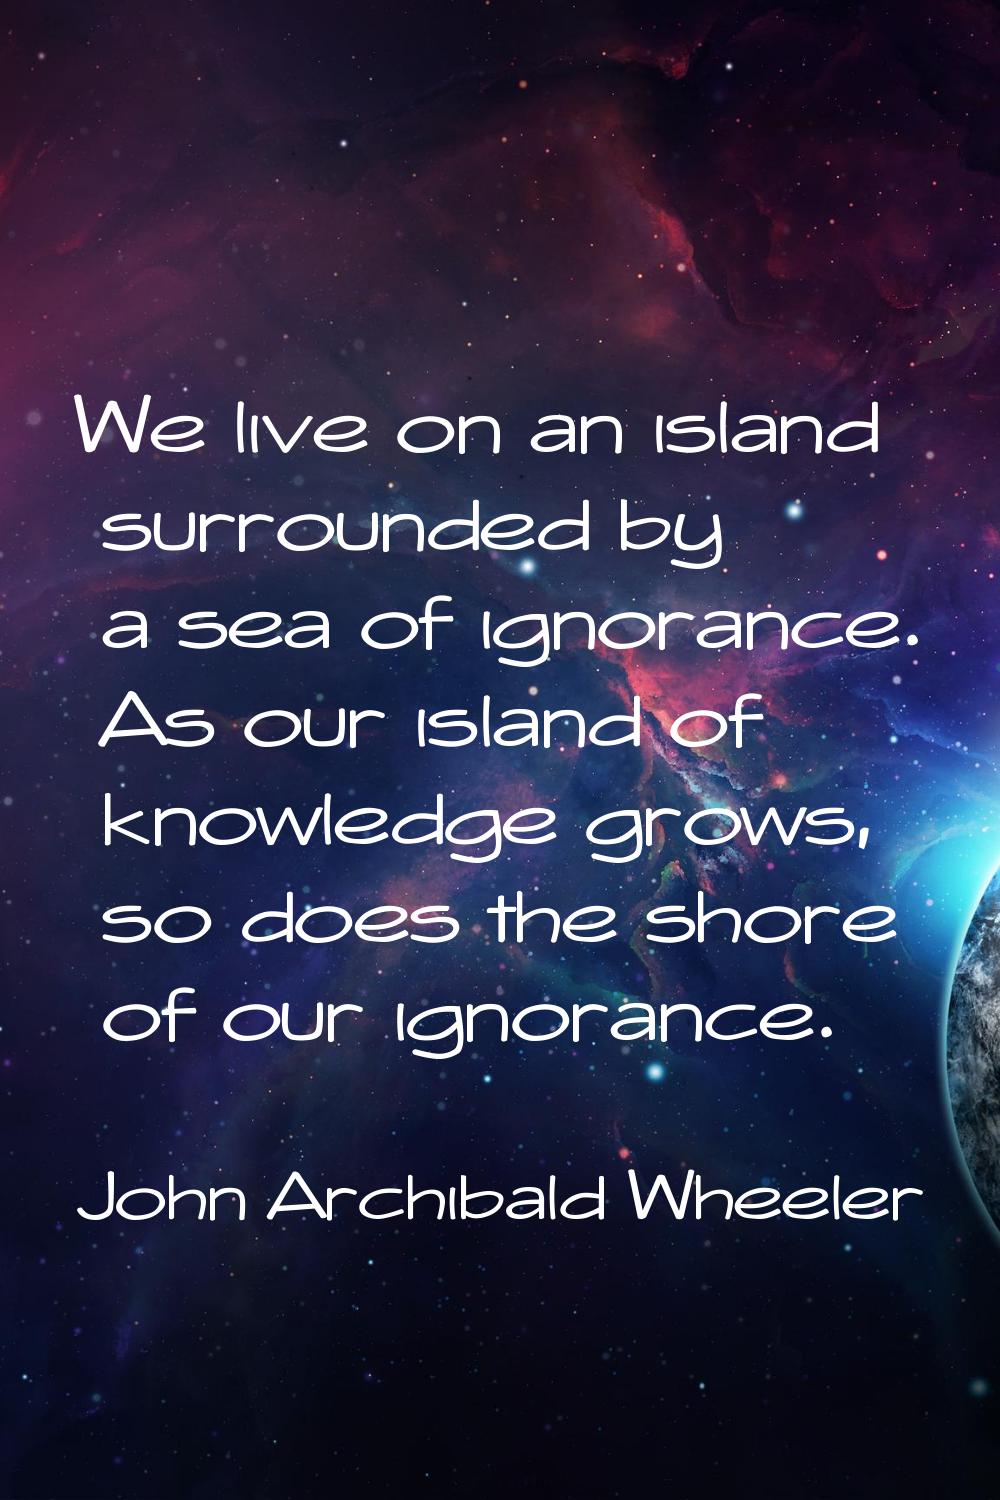 We live on an island surrounded by a sea of ignorance. As our island of knowledge grows, so does th